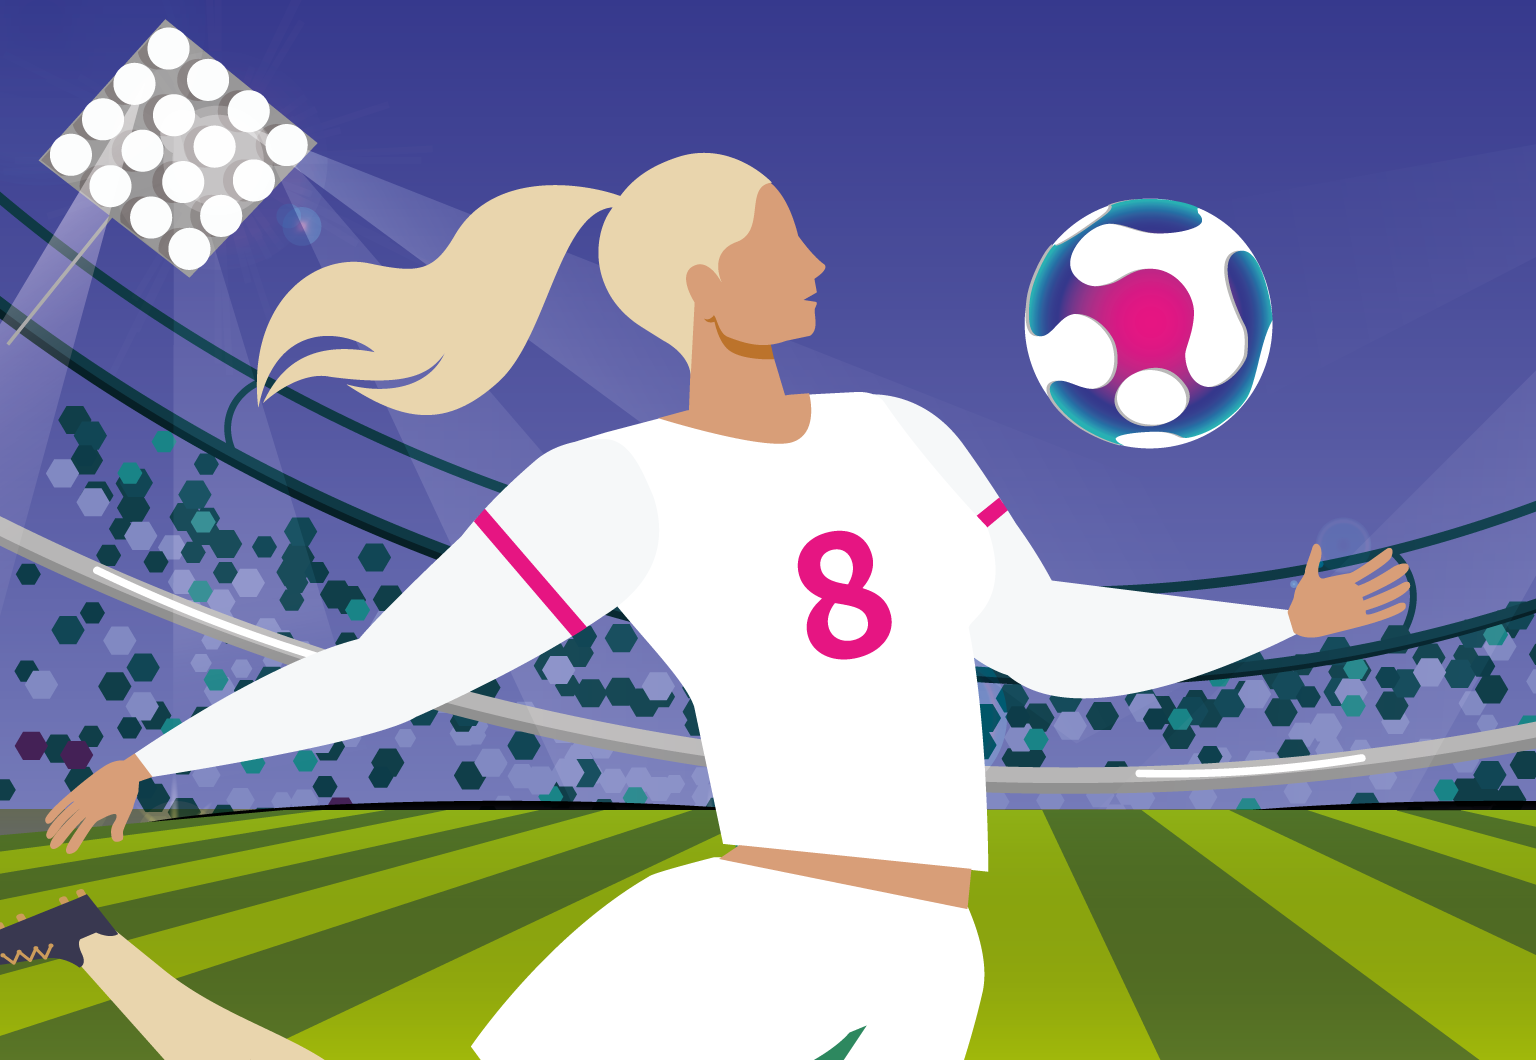 GIVEAWAY: Win $15 with the Women's Euros!